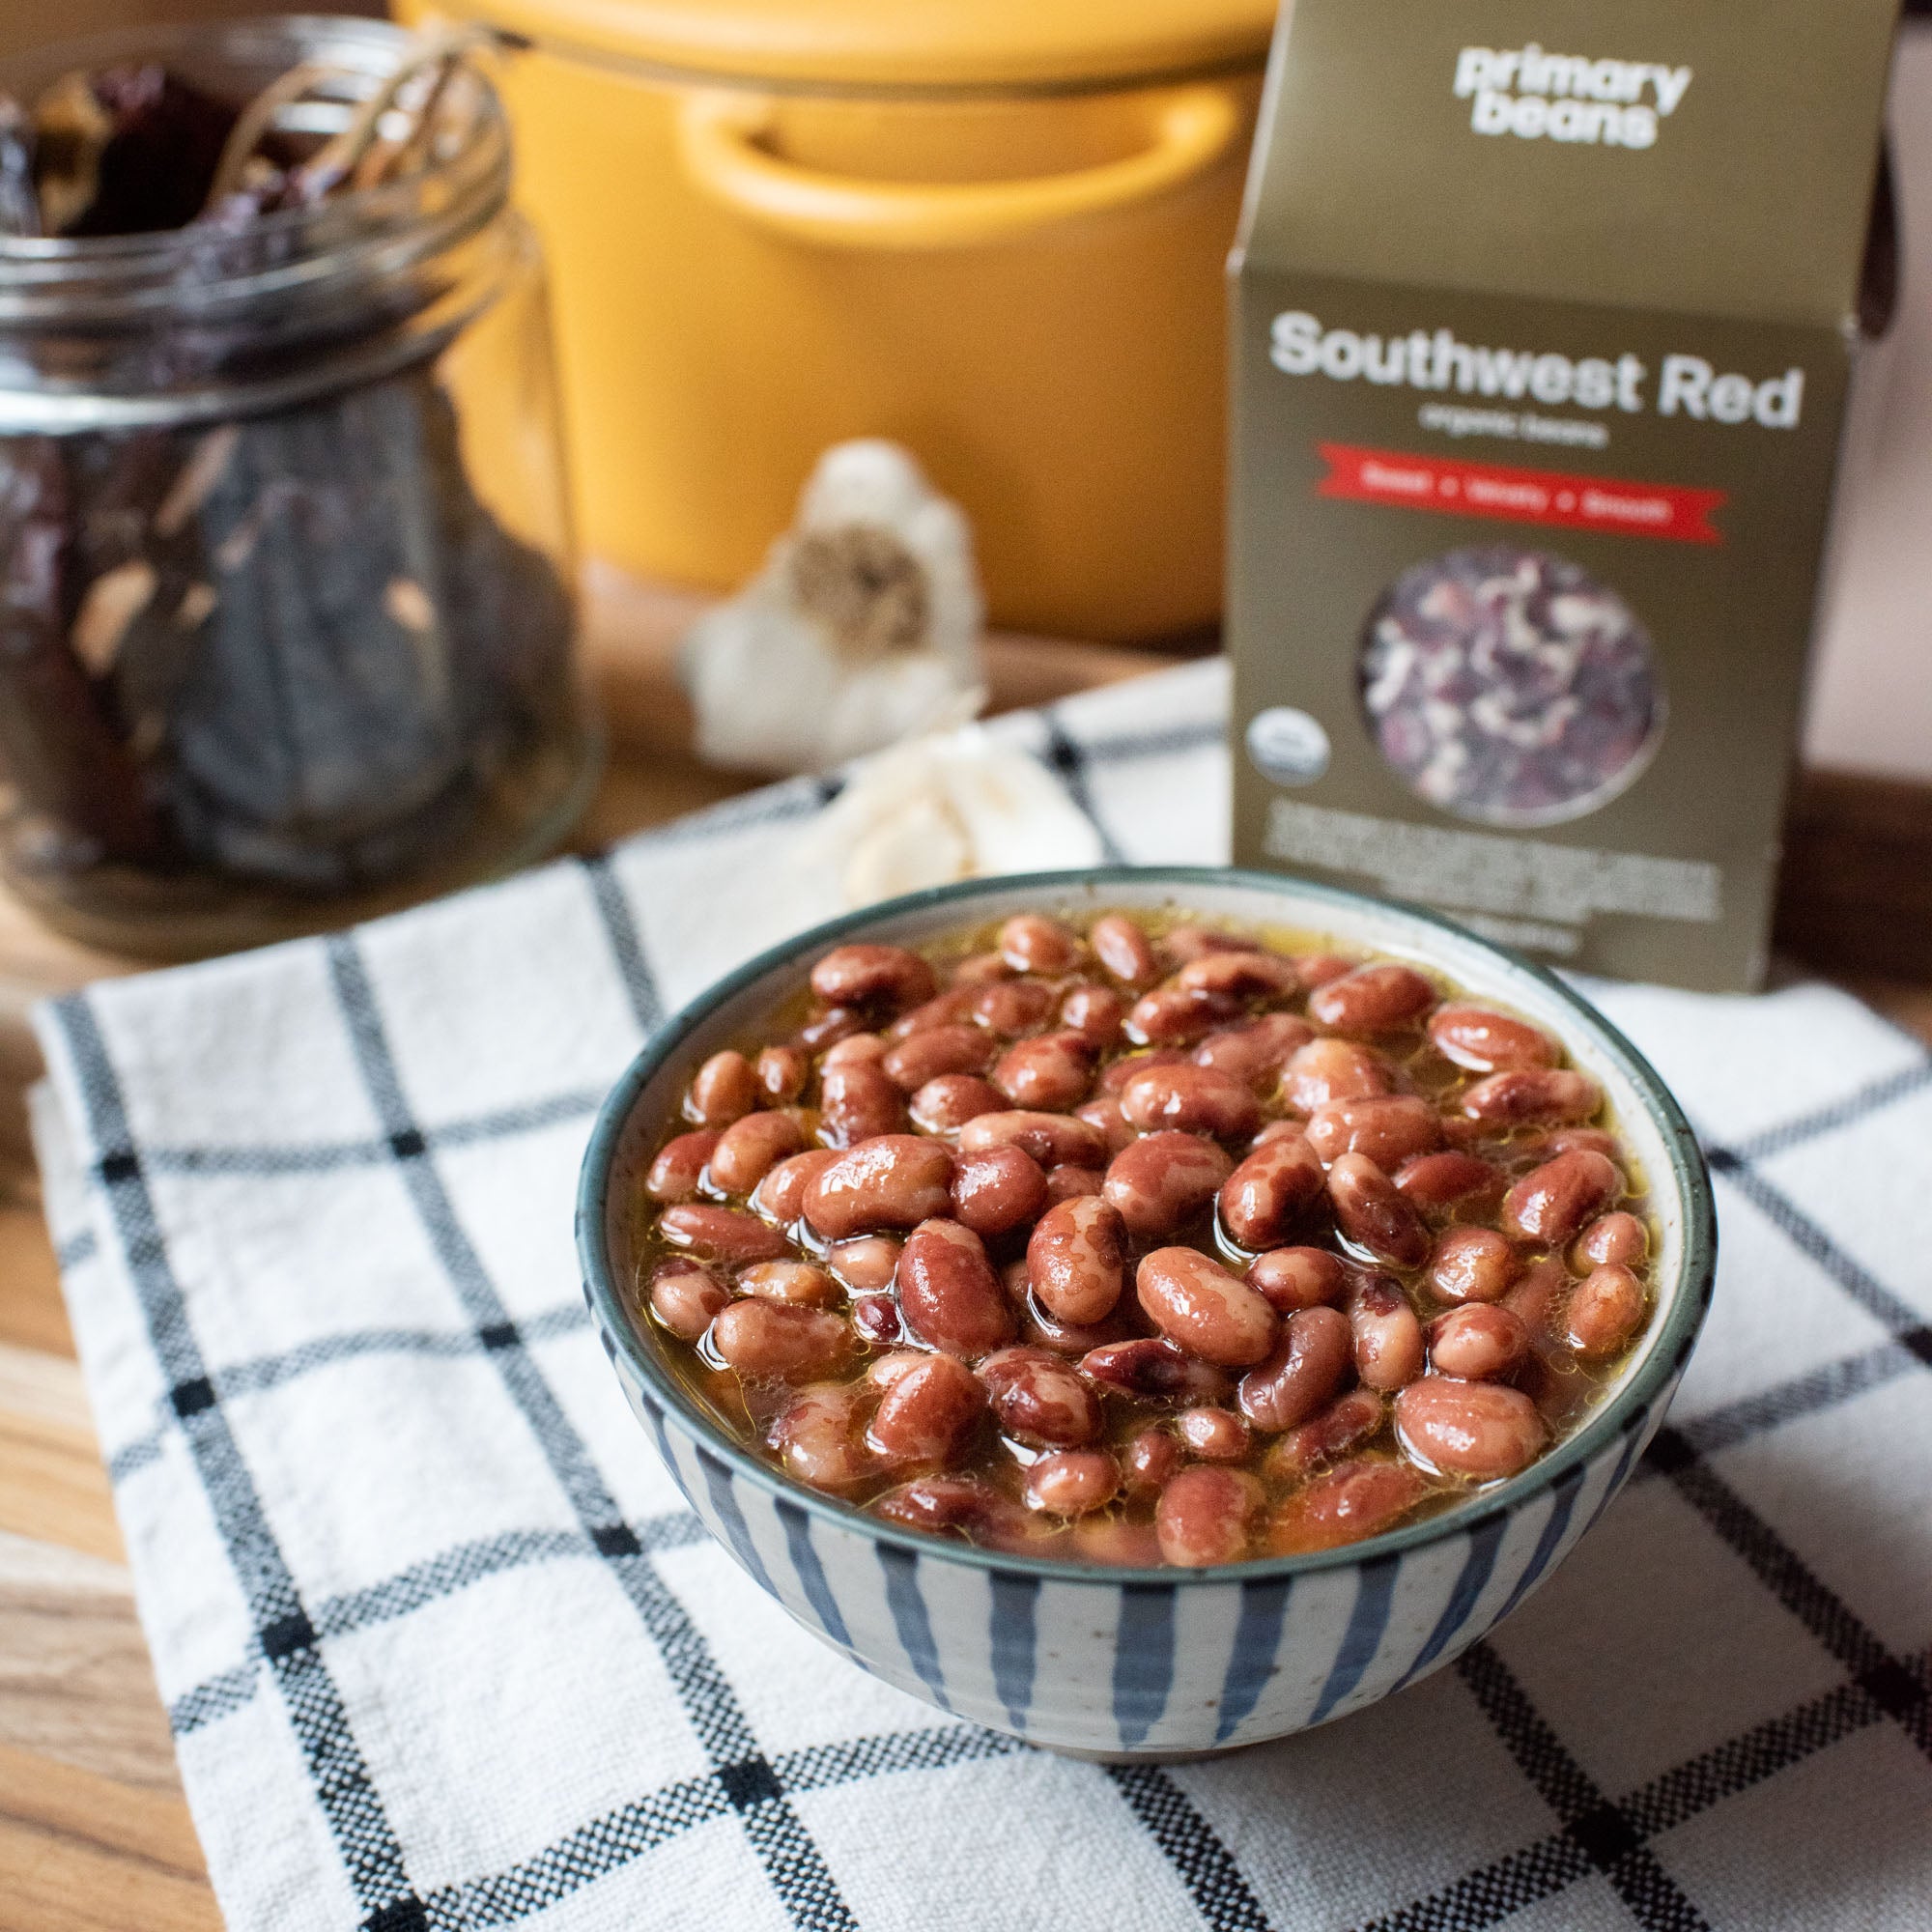 Primary Beans brothy Organic Southwest Red beans